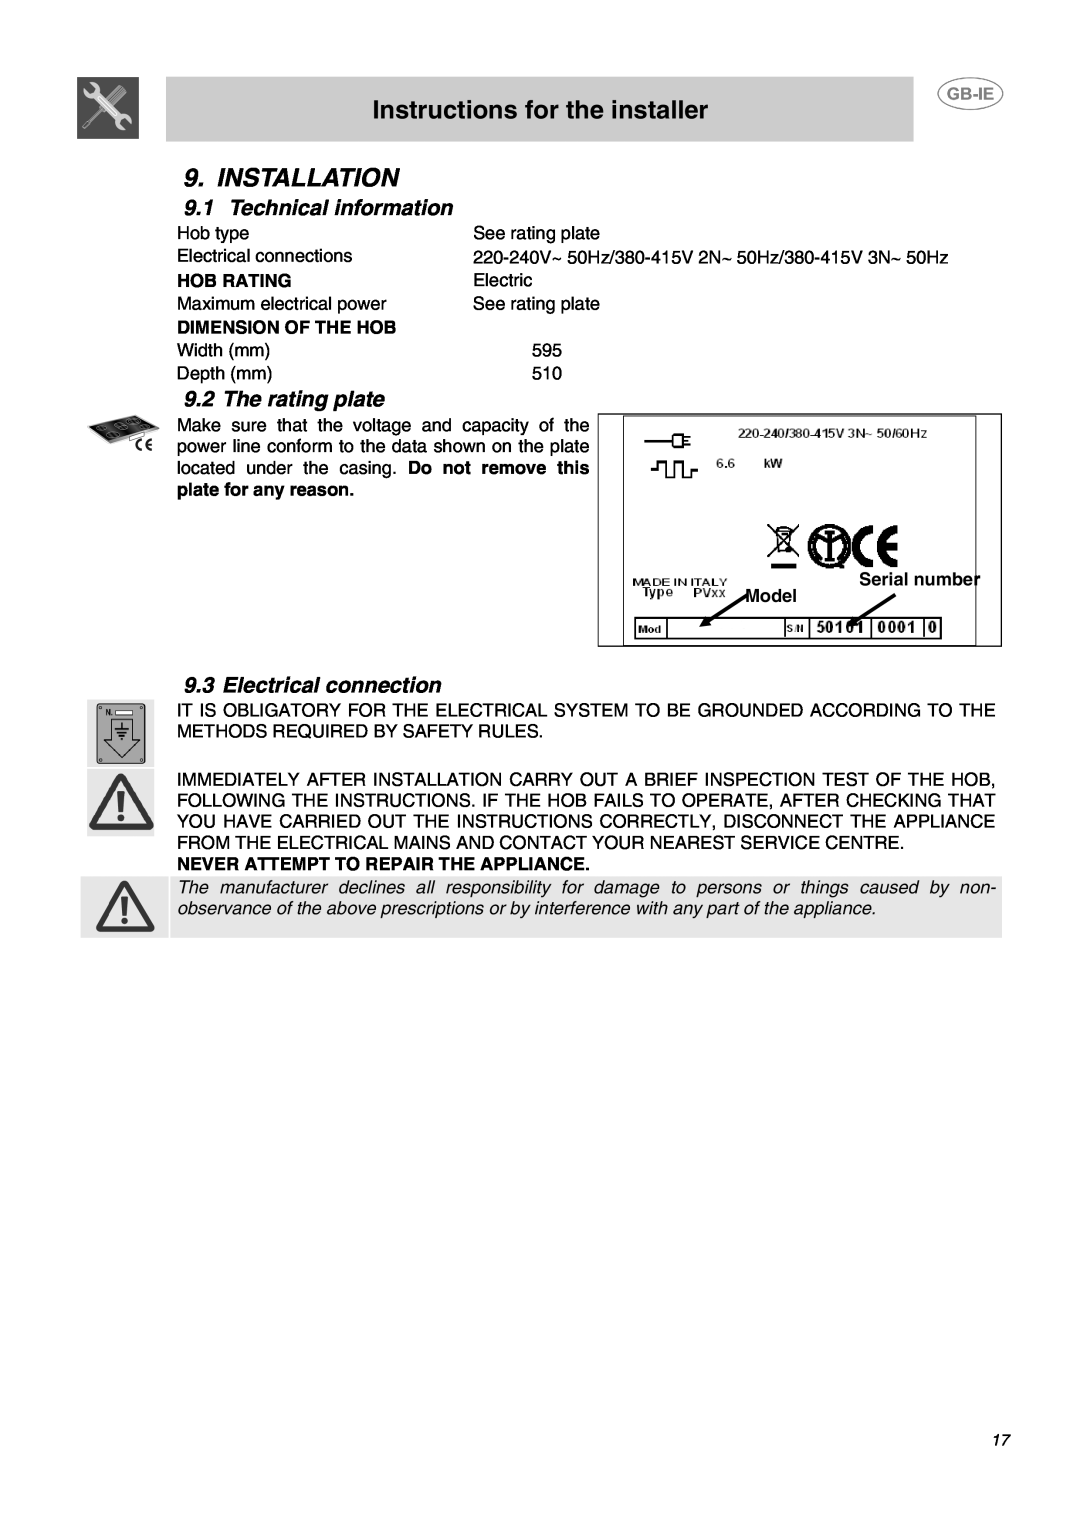 Smeg SE60X Instructions for the installer, Installation, 9.1Technical information, The rating plate, Electrical connection 